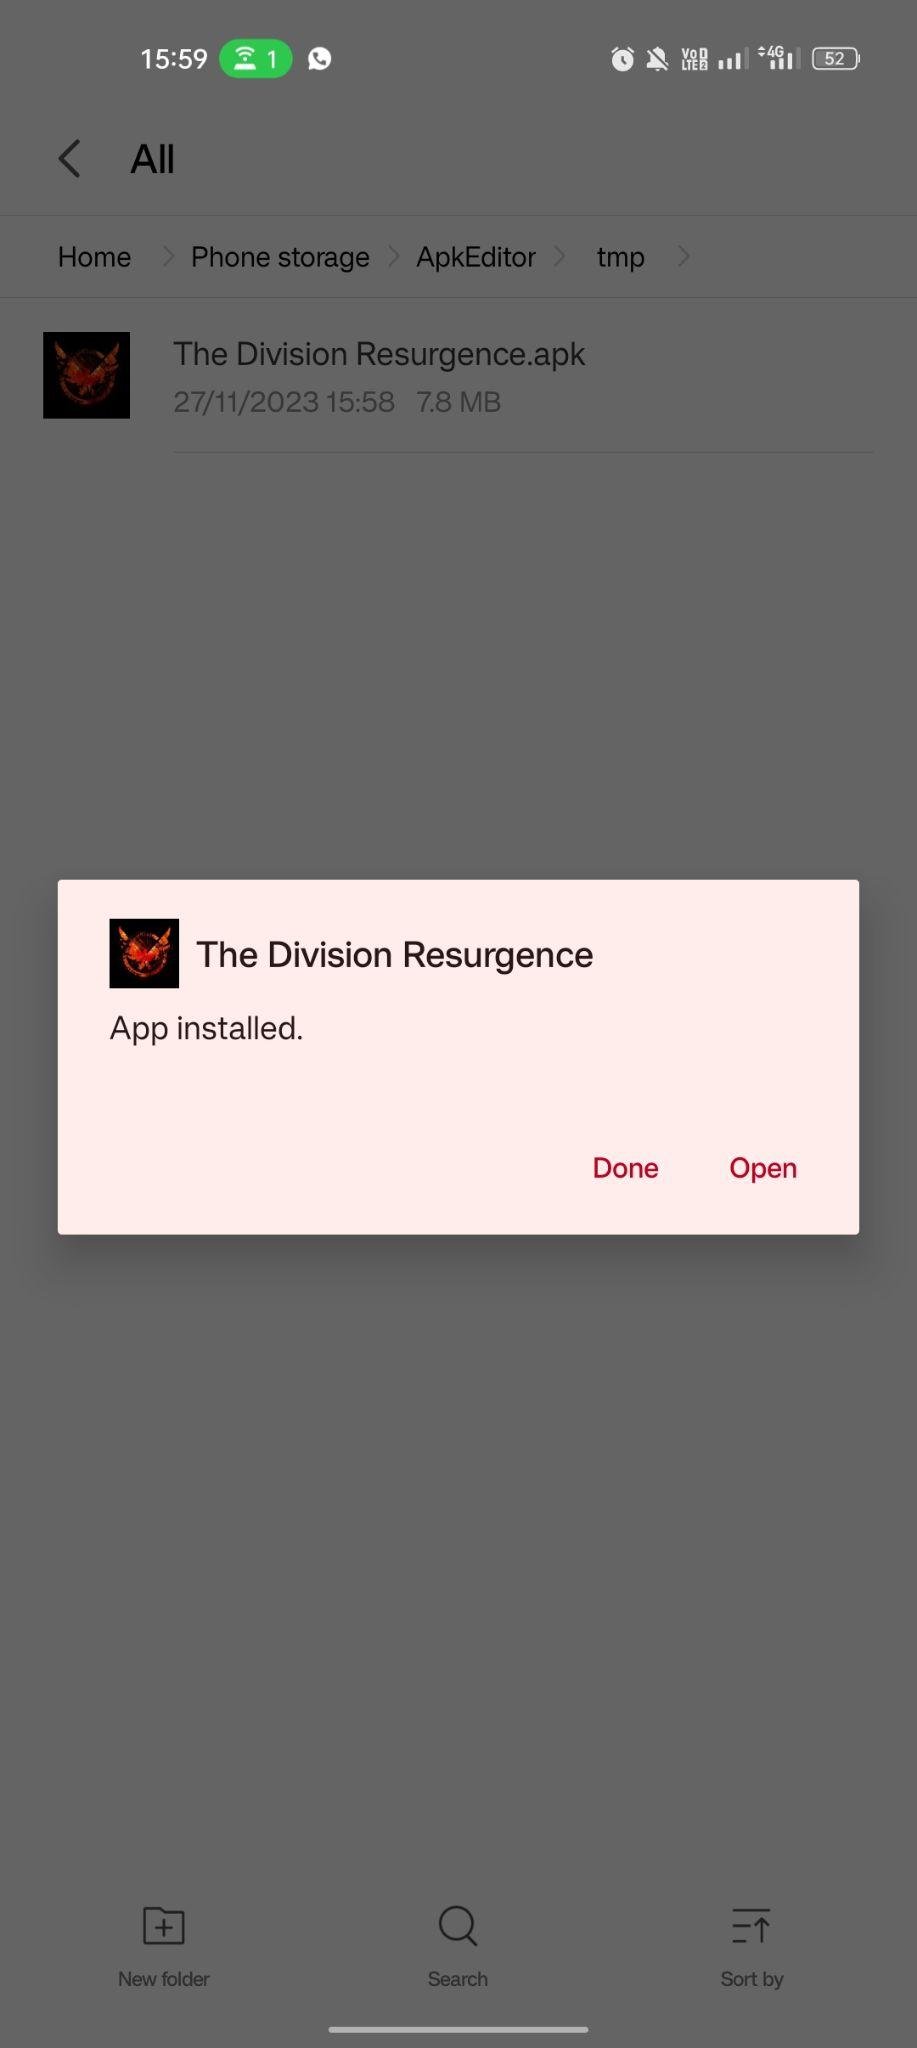 The Division Resurgence apk installed